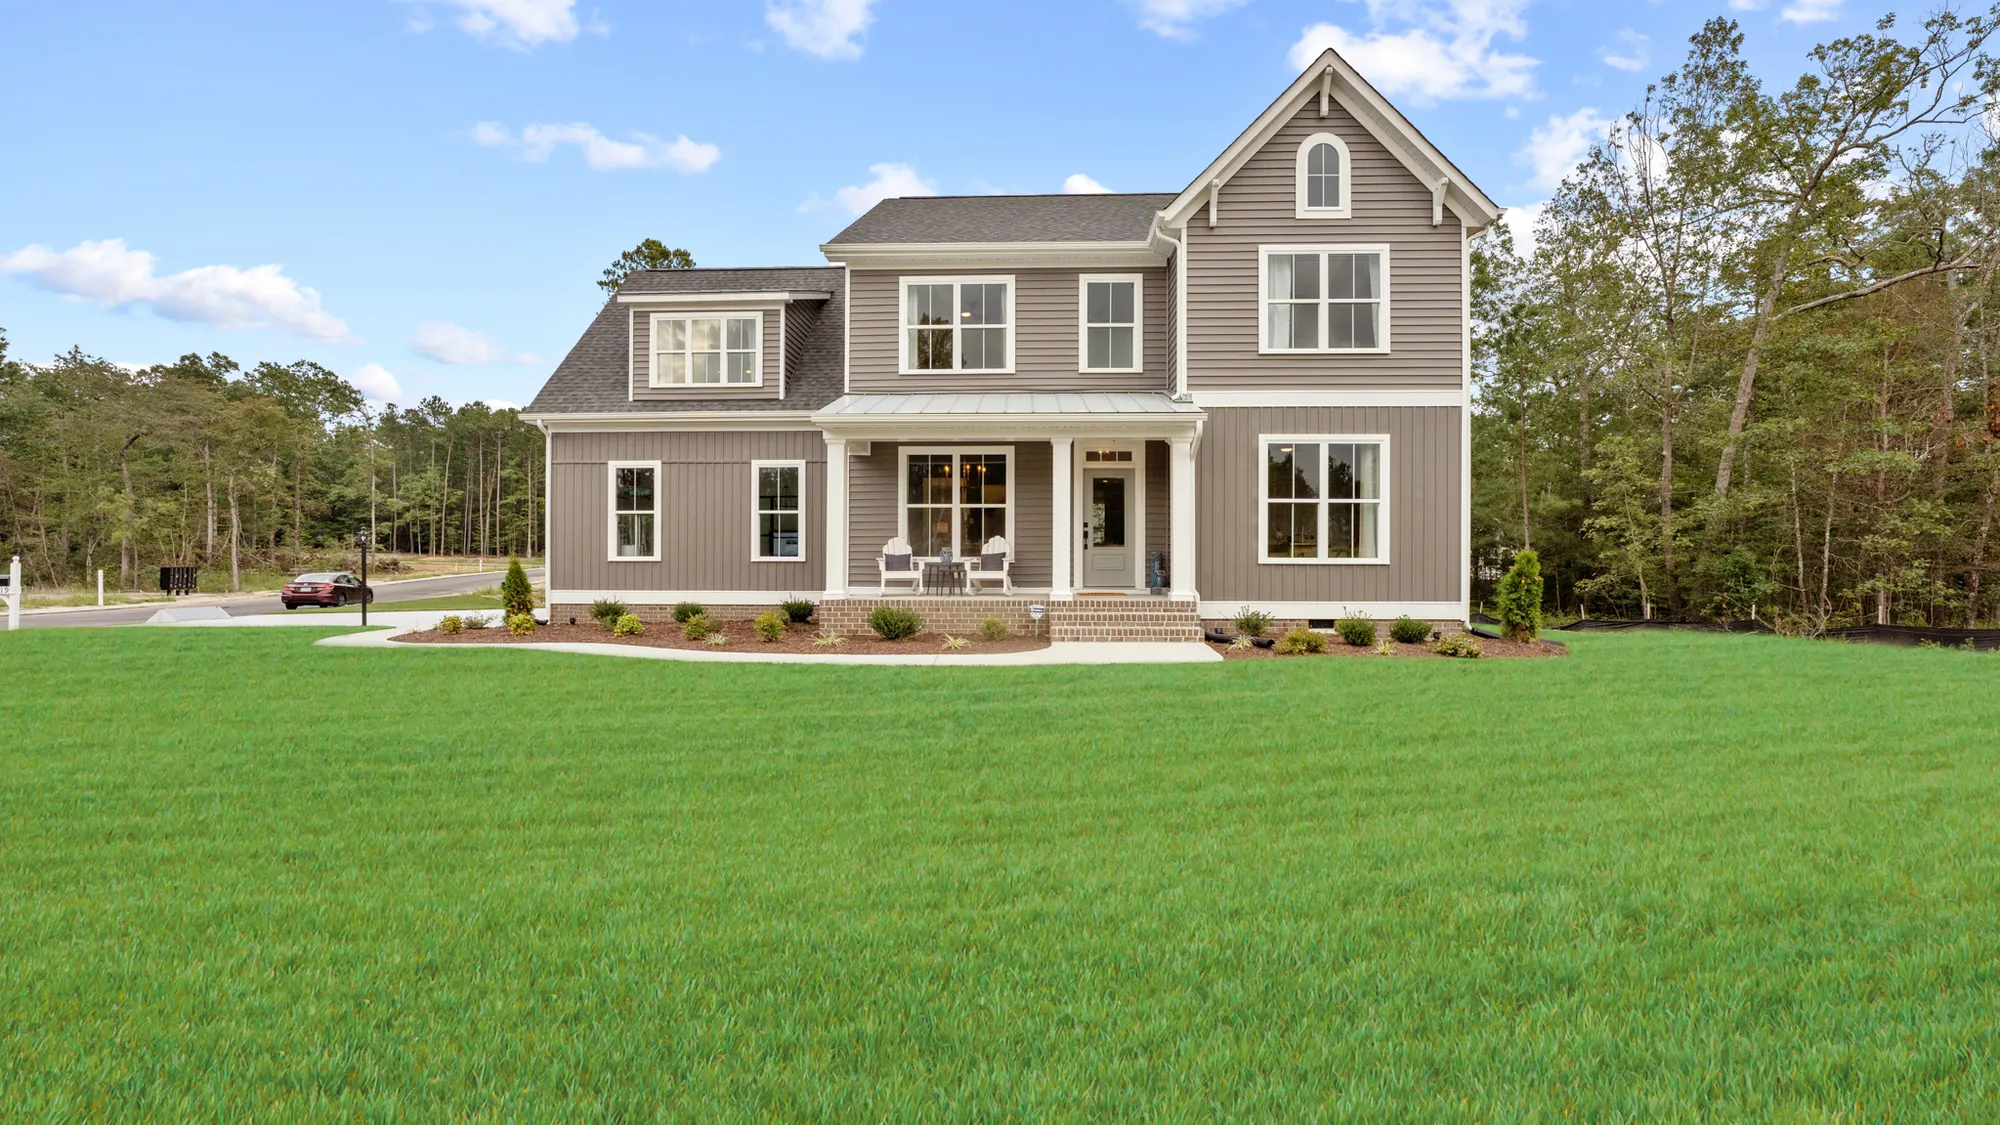 Visit Our Furnished Model Home or Call 804.979.2954 to Schedule an Appointment